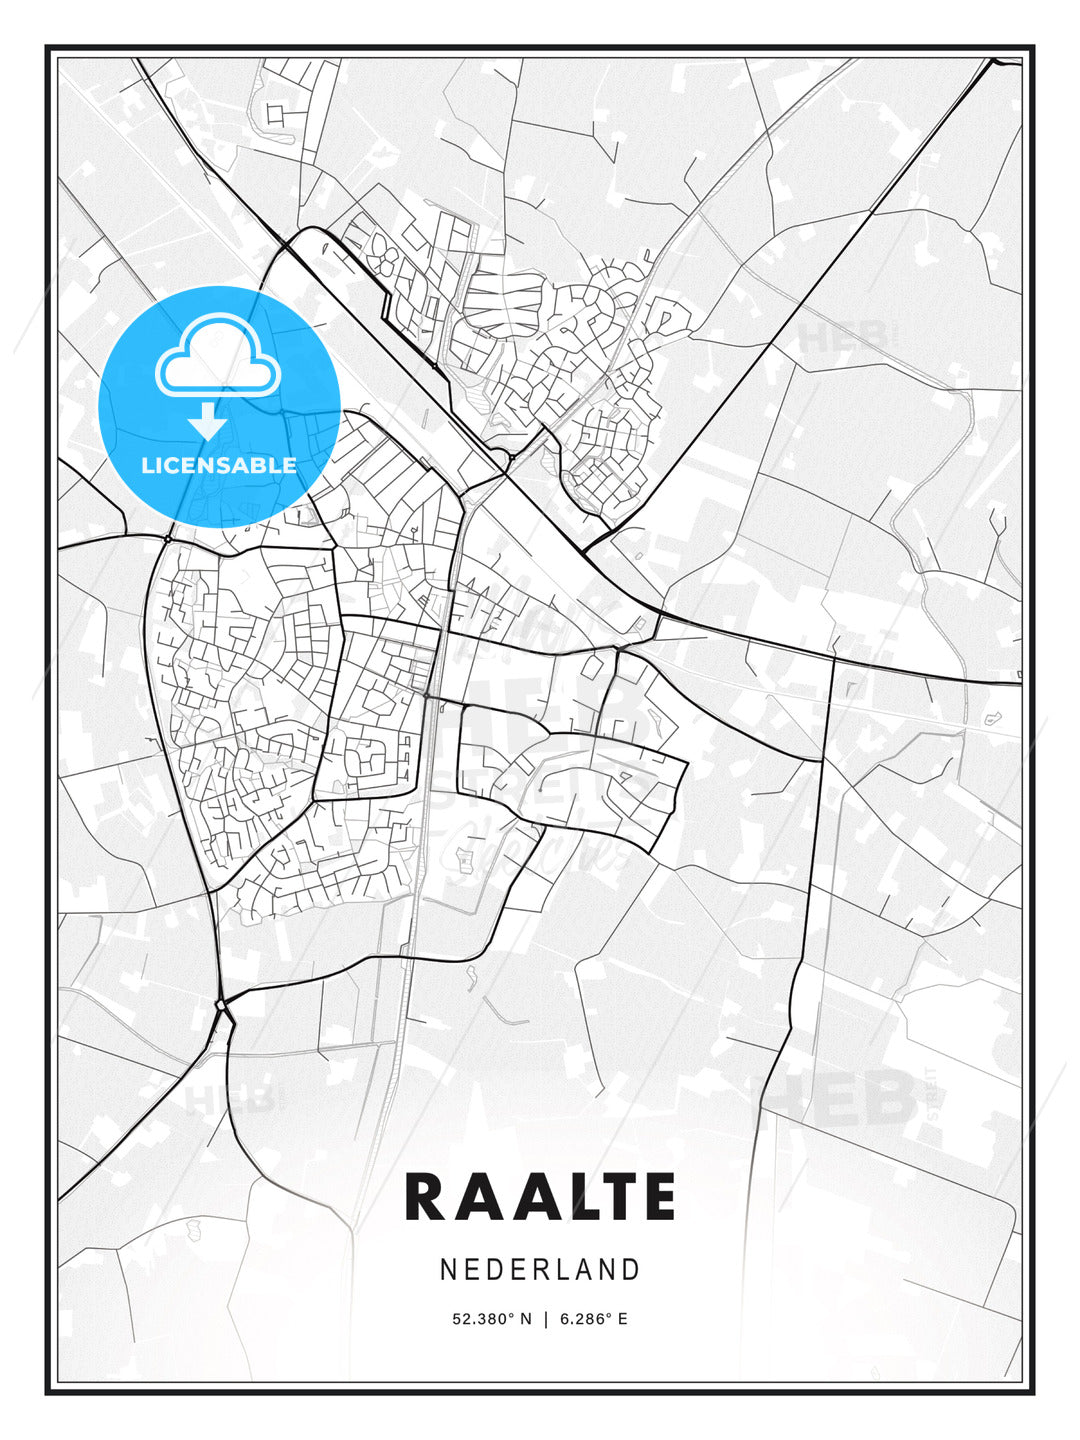 Raalte, Netherlands, Modern Print Template in Various Formats - HEBSTREITS Sketches